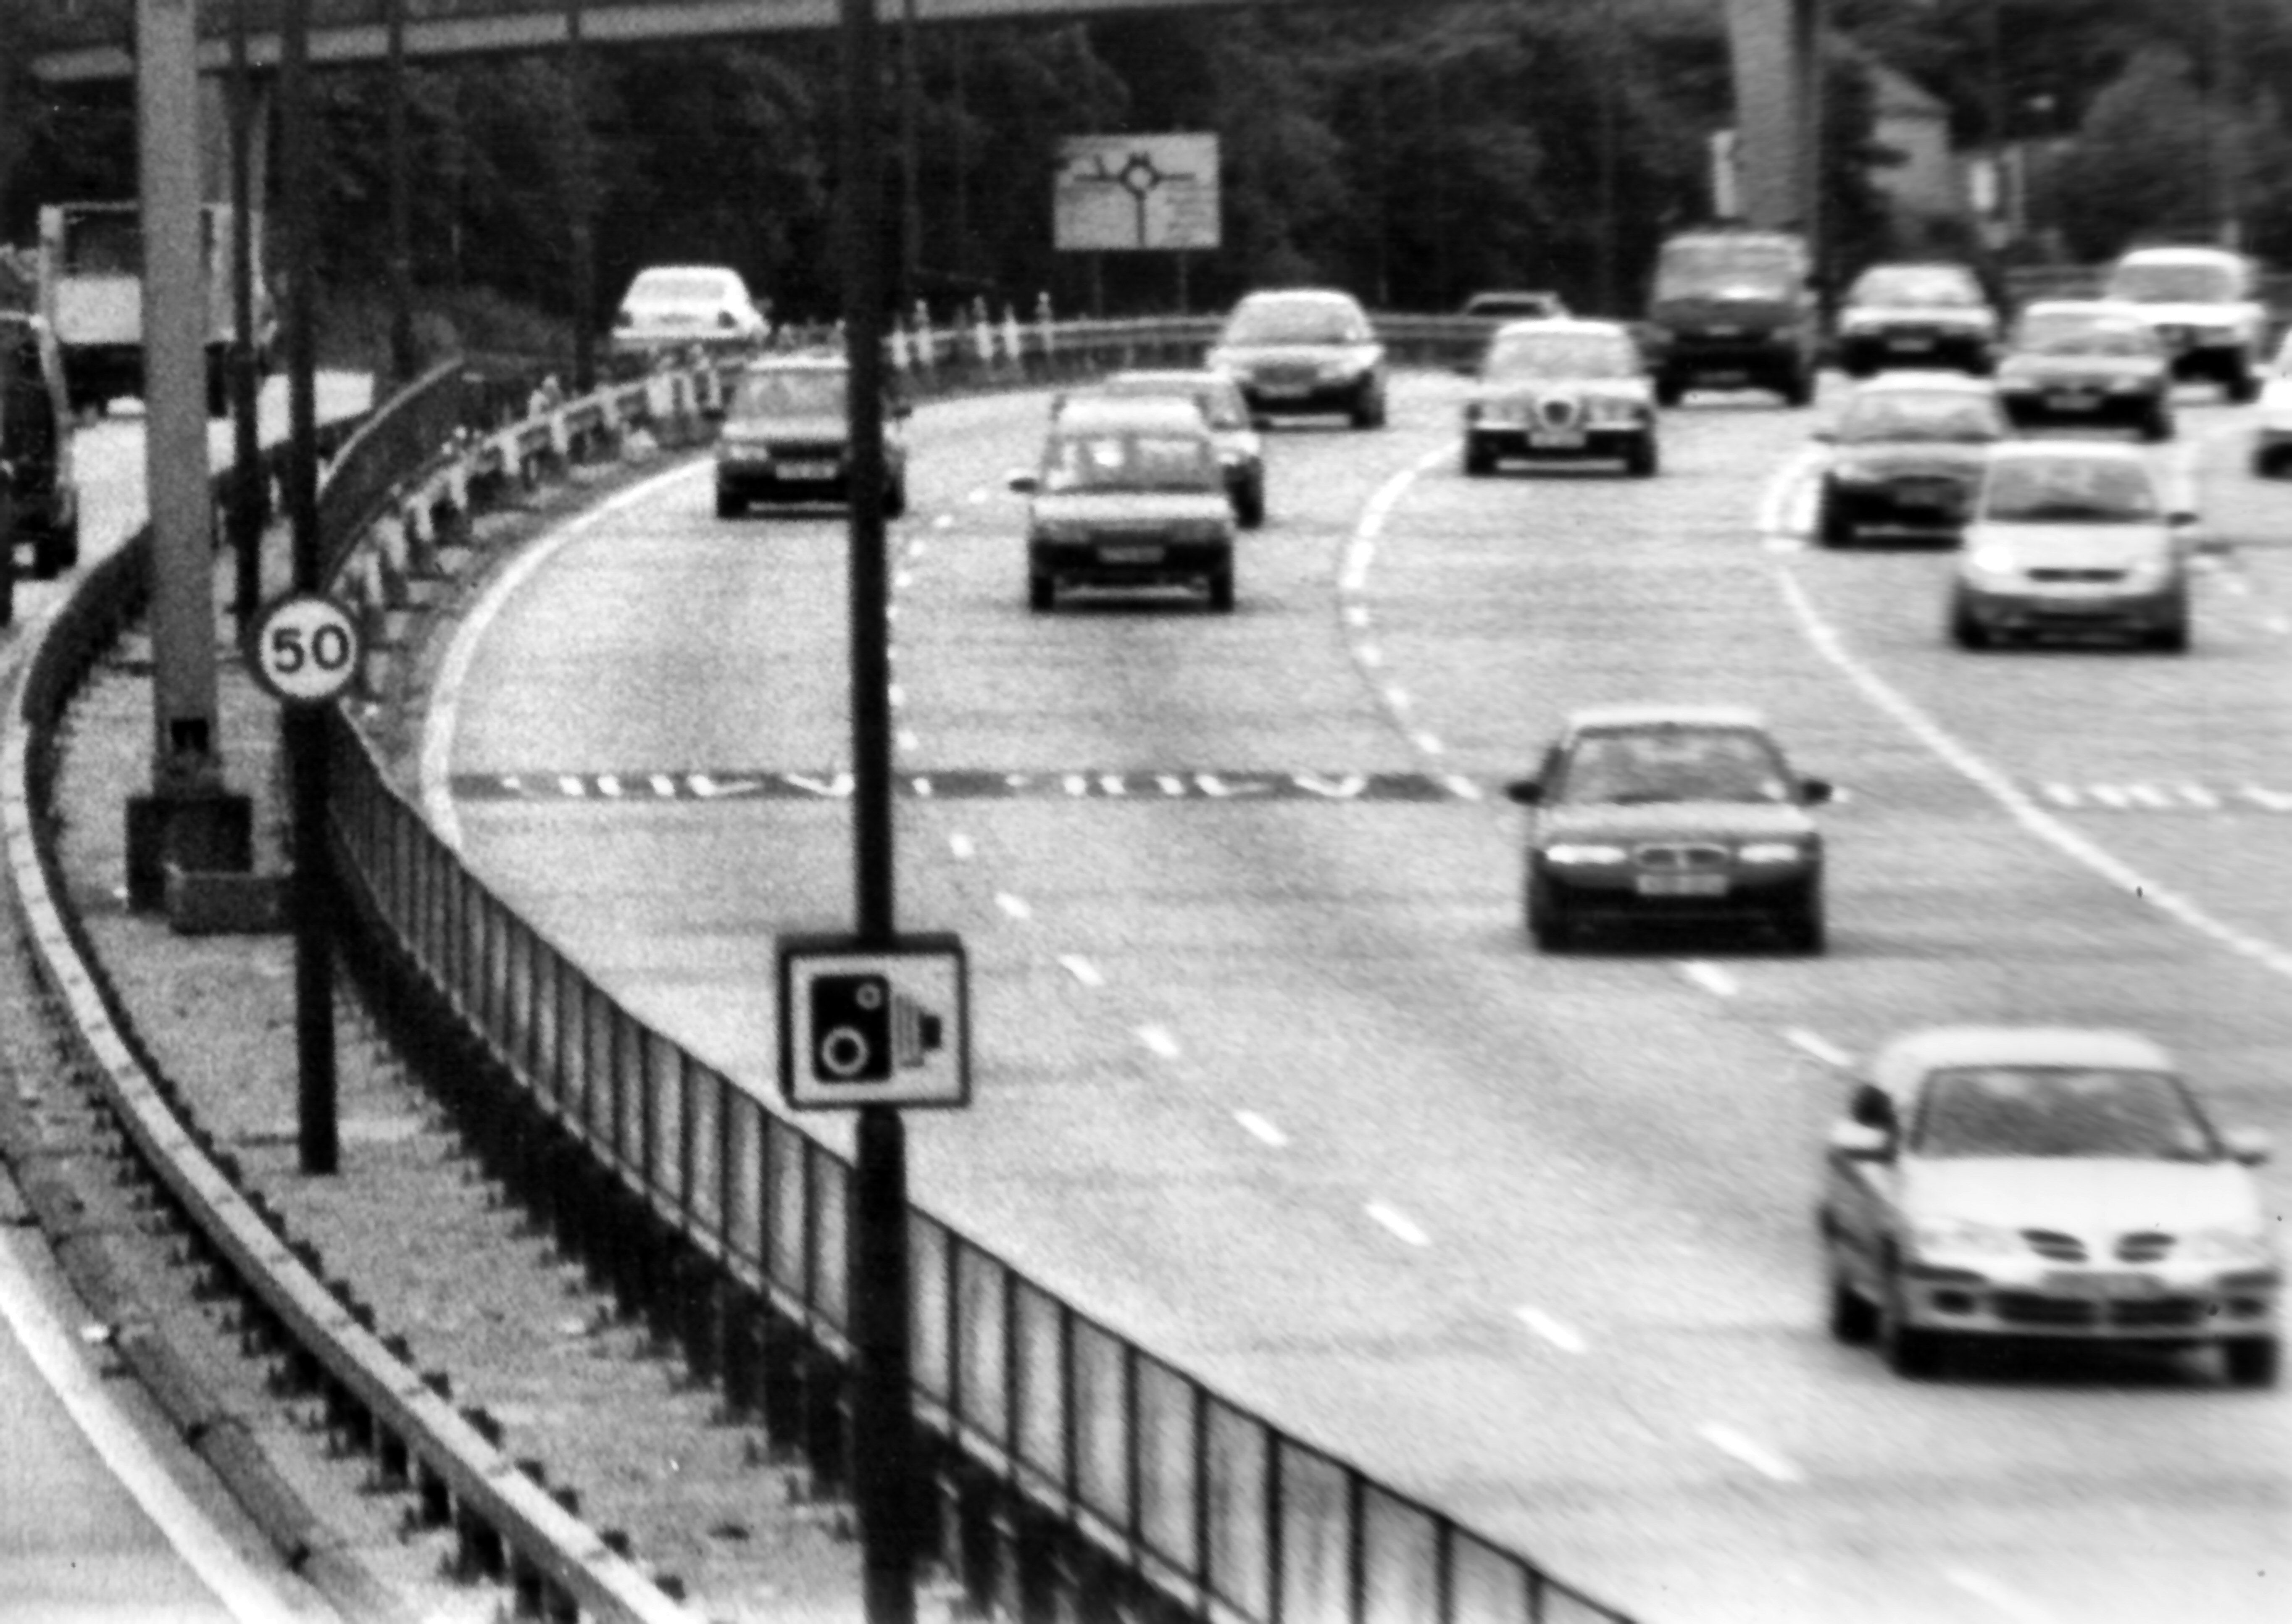 Millions of British drivers have fear of motorway driving. They believe they lack the critical skills necessary for using motorways.